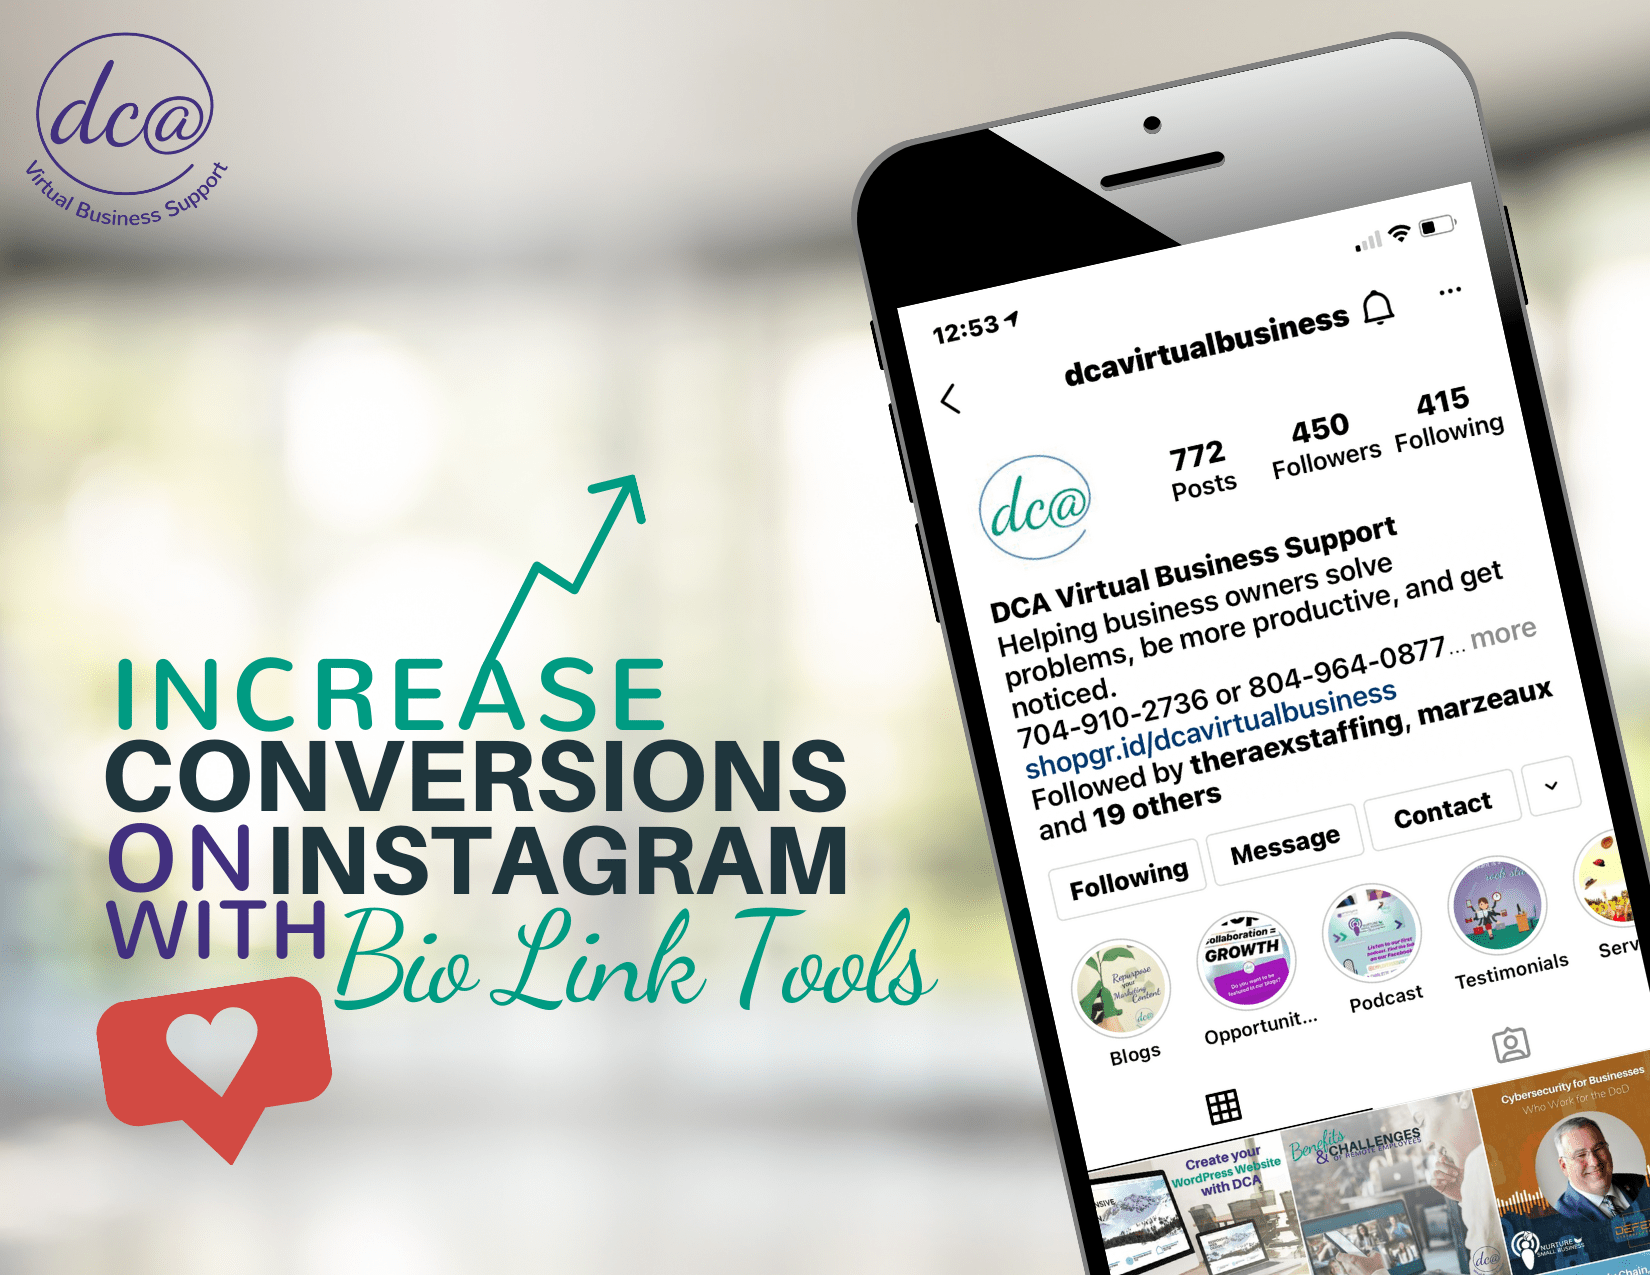 Instagram Bio Link Tools to Increase Followers!